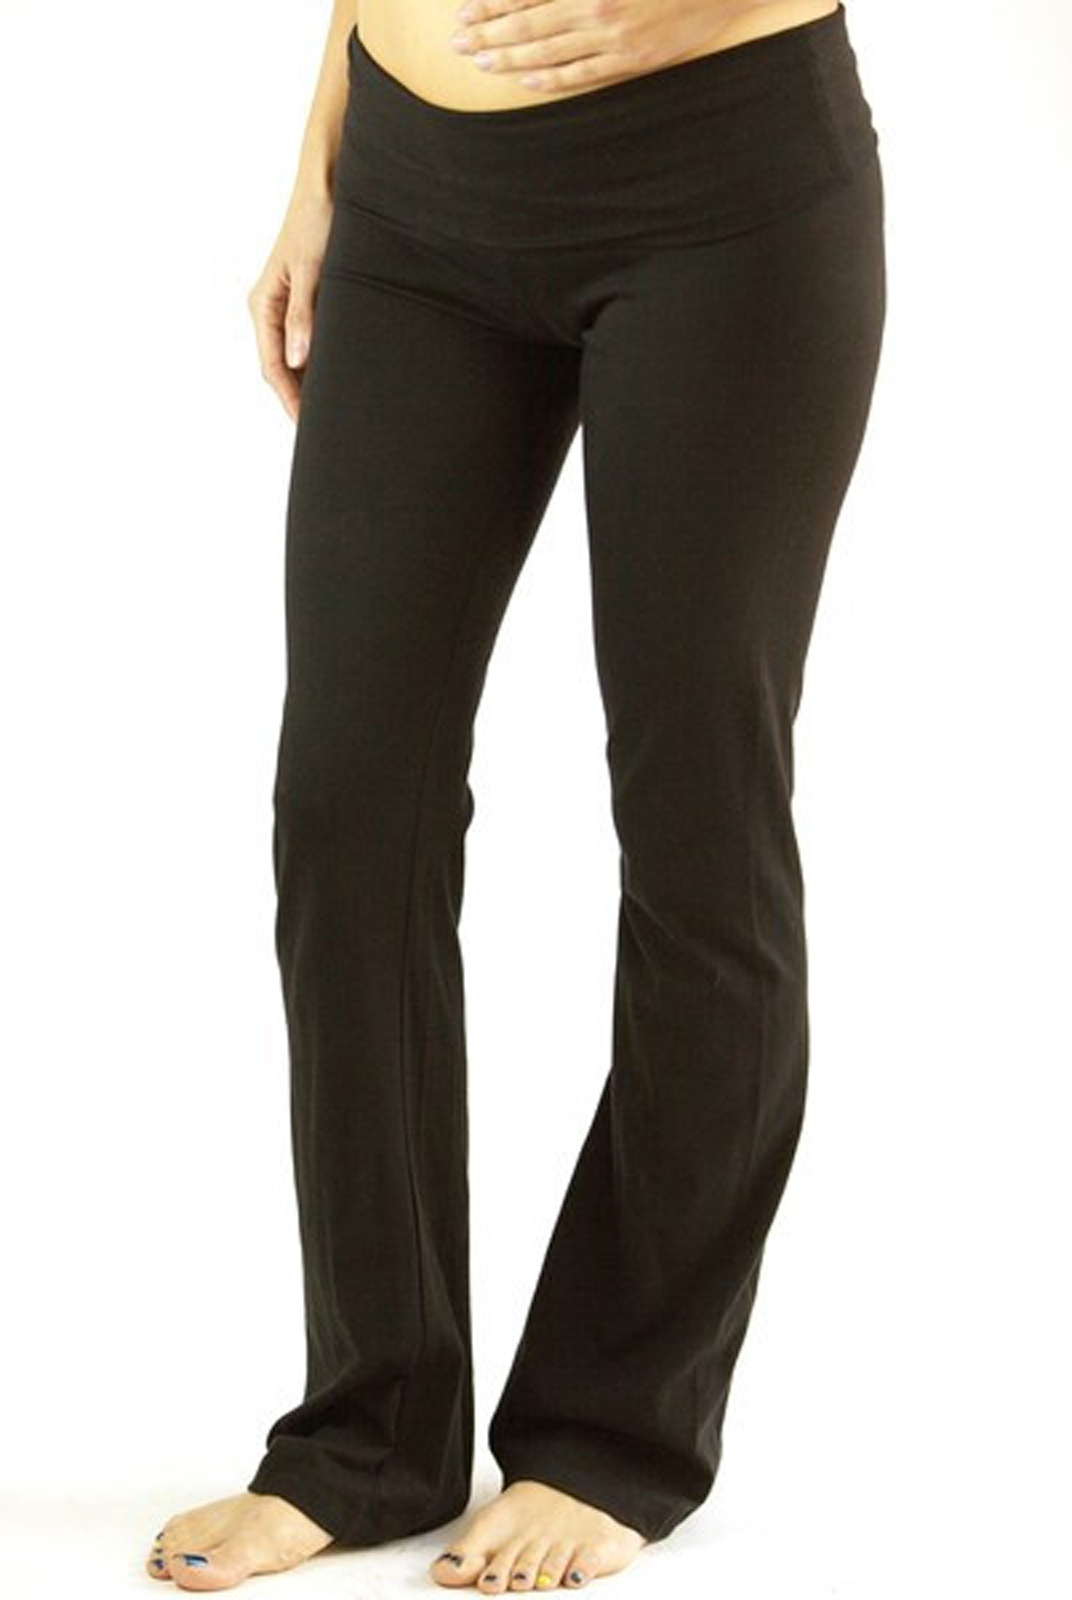 Maternity Yoga Pant - Mommylicious - Online Exclusive